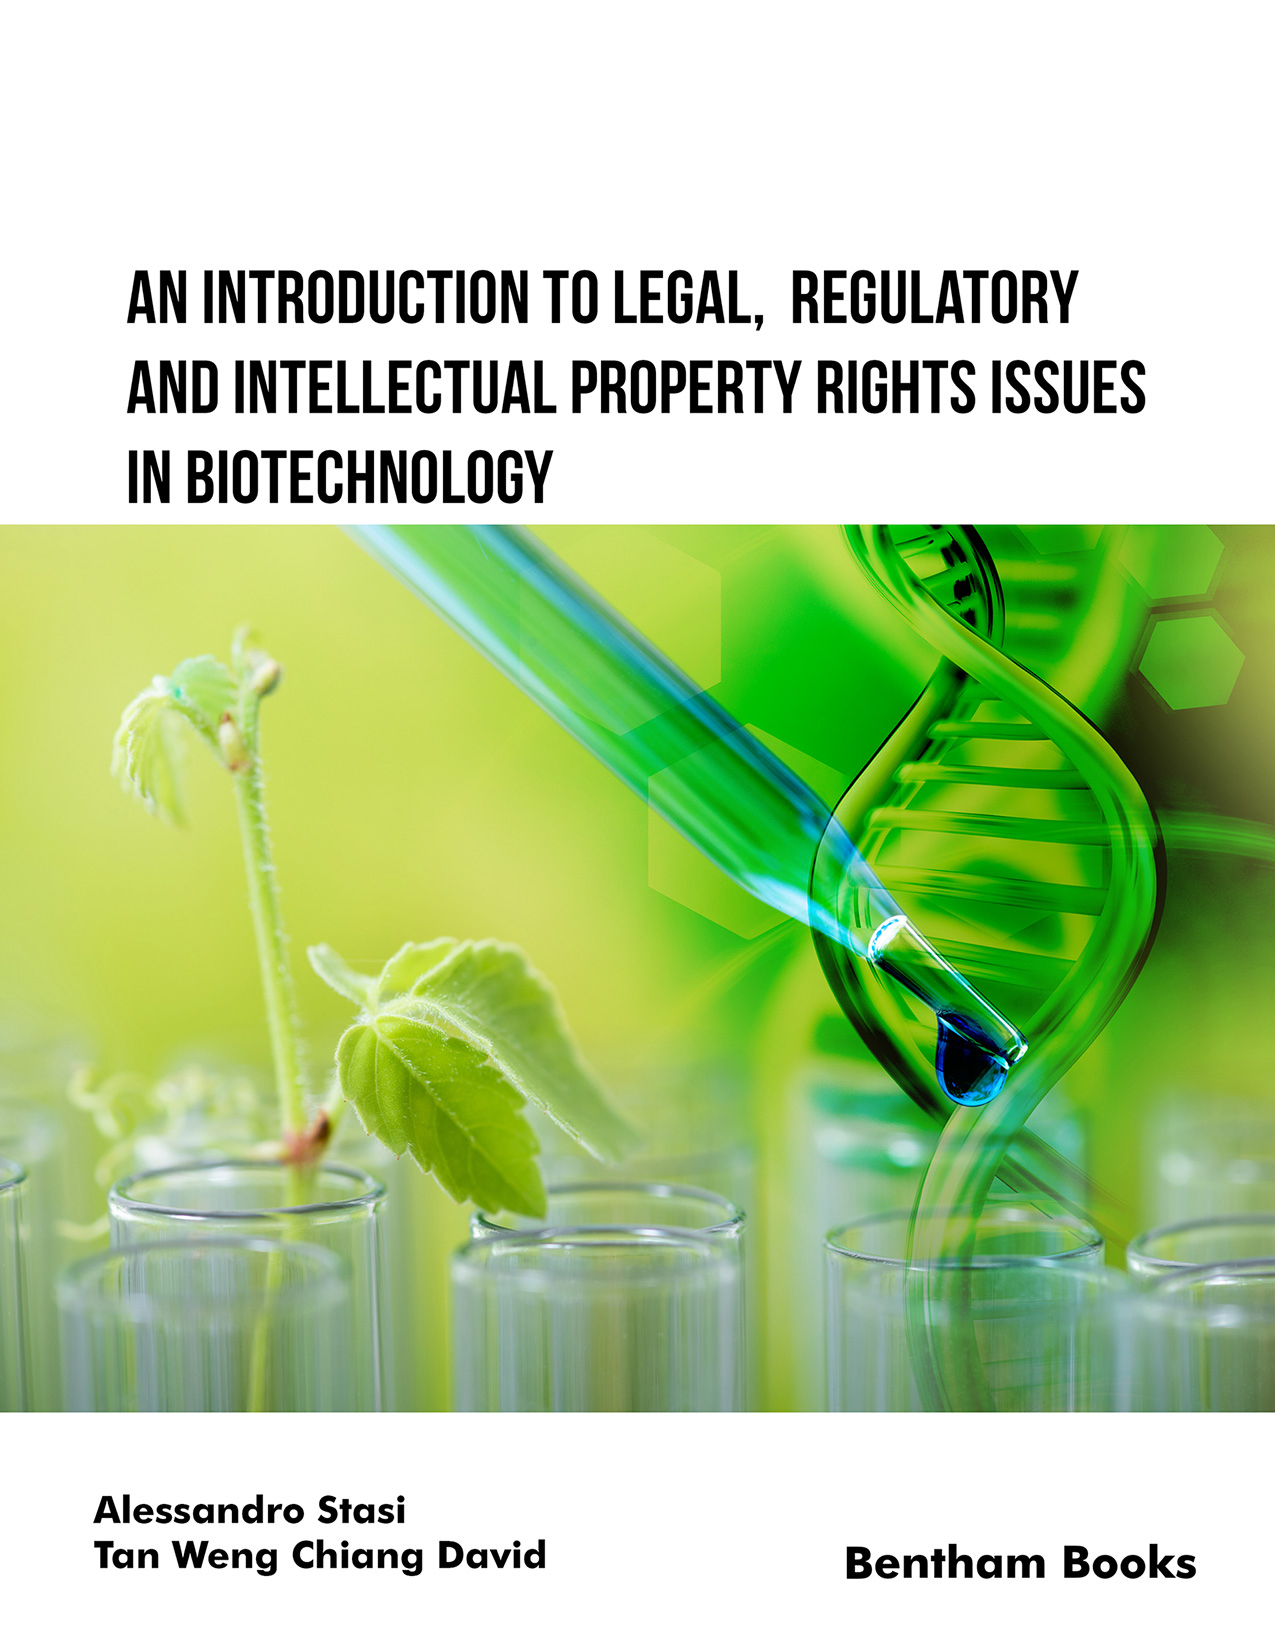  An Introduction to Legal, Regulatory and Intellectual Property Rights Issues in Biotechnology